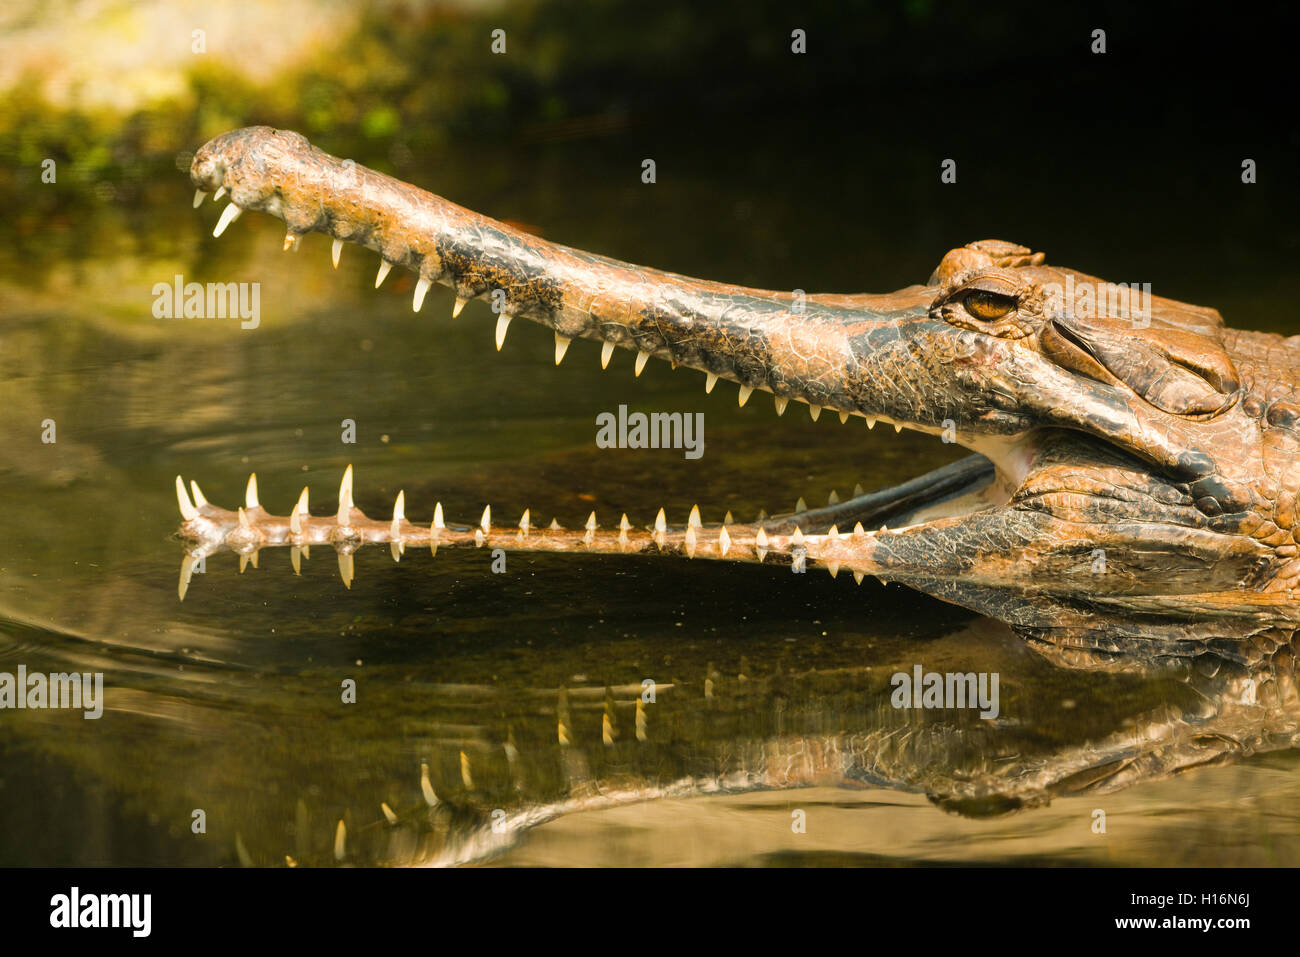 False gharial (Tomistoma schlegelii) with its mouth open, in the water, portrait, captive Stock Photo